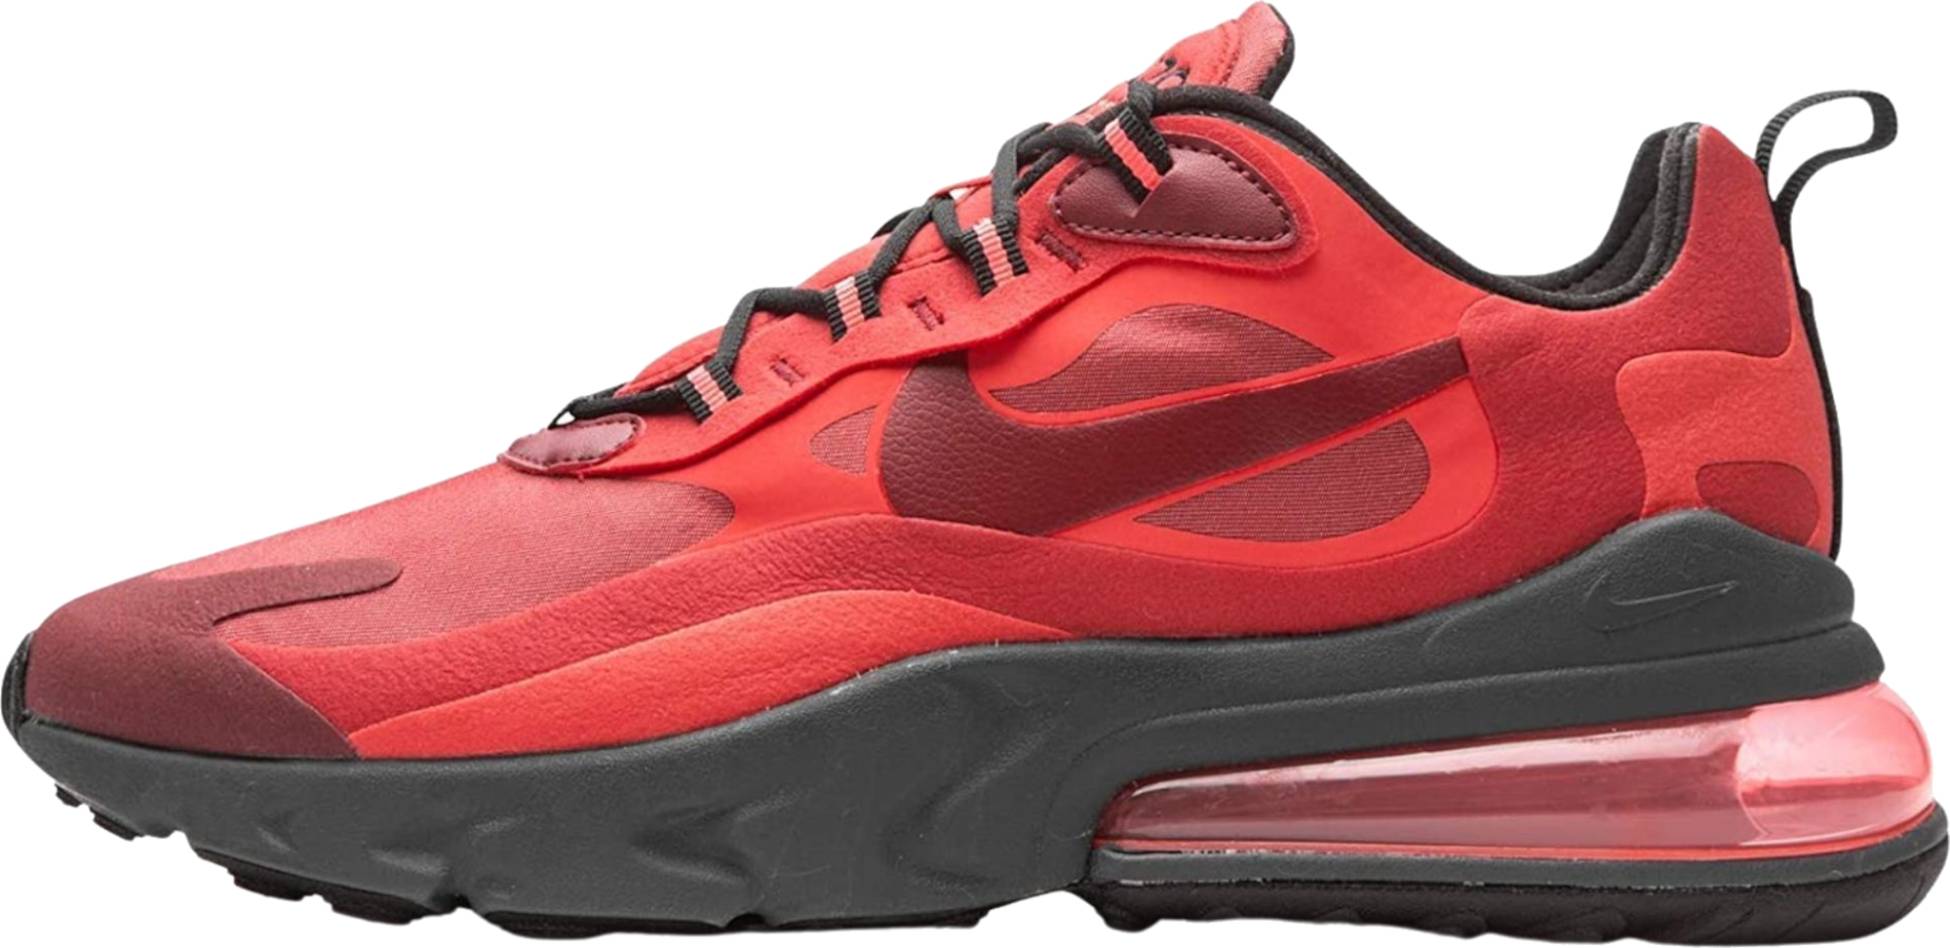 nike red shoes men